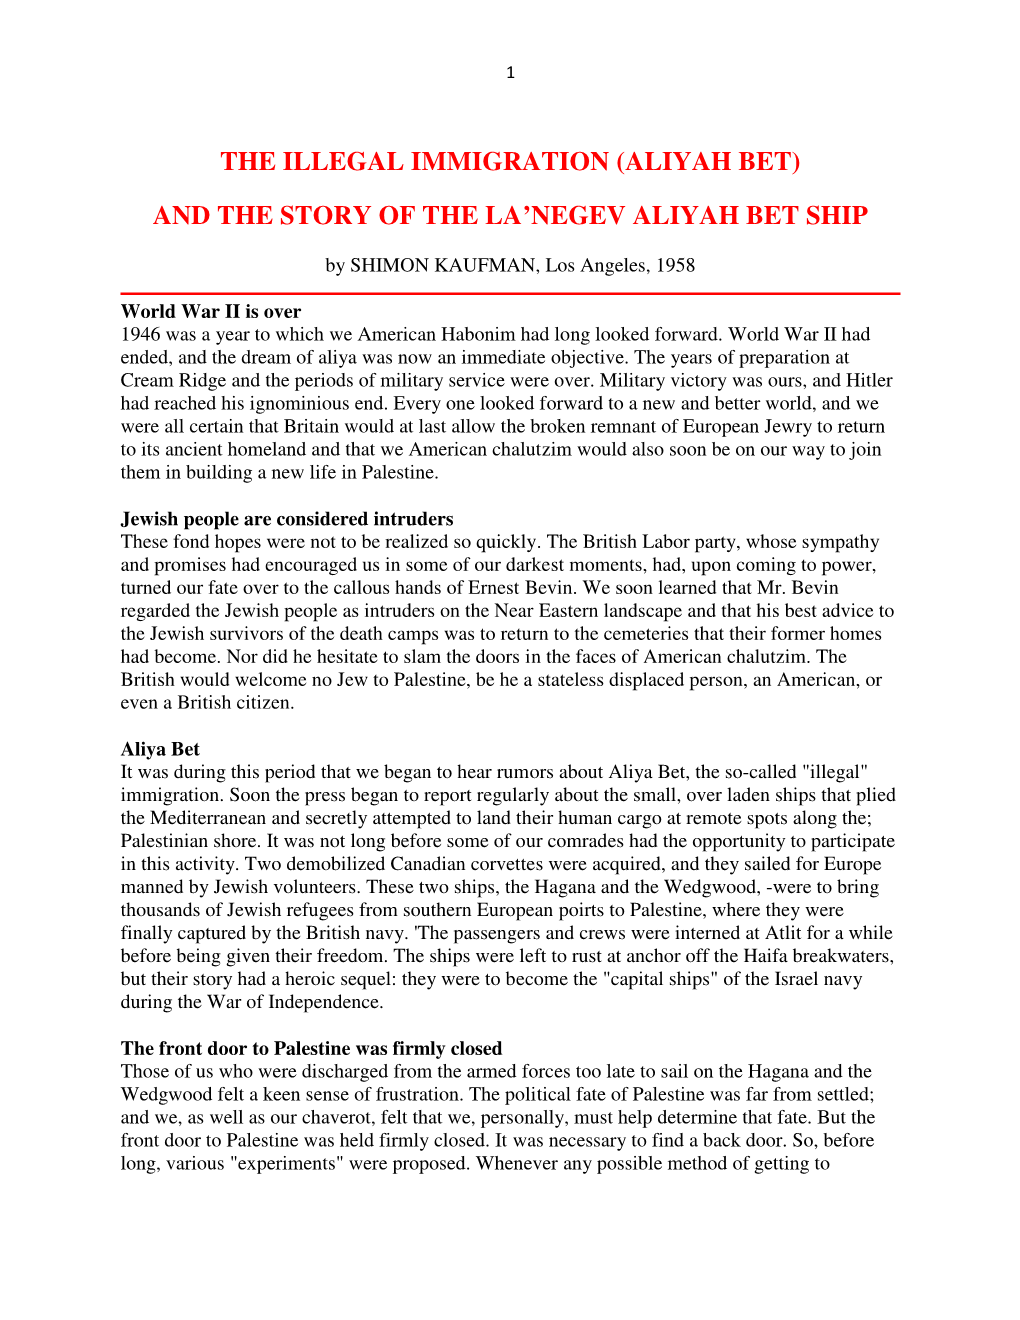 The Illegal Immigration (Aliyah Bet) and the Story of the La’Negev Aliyah Bet Ship